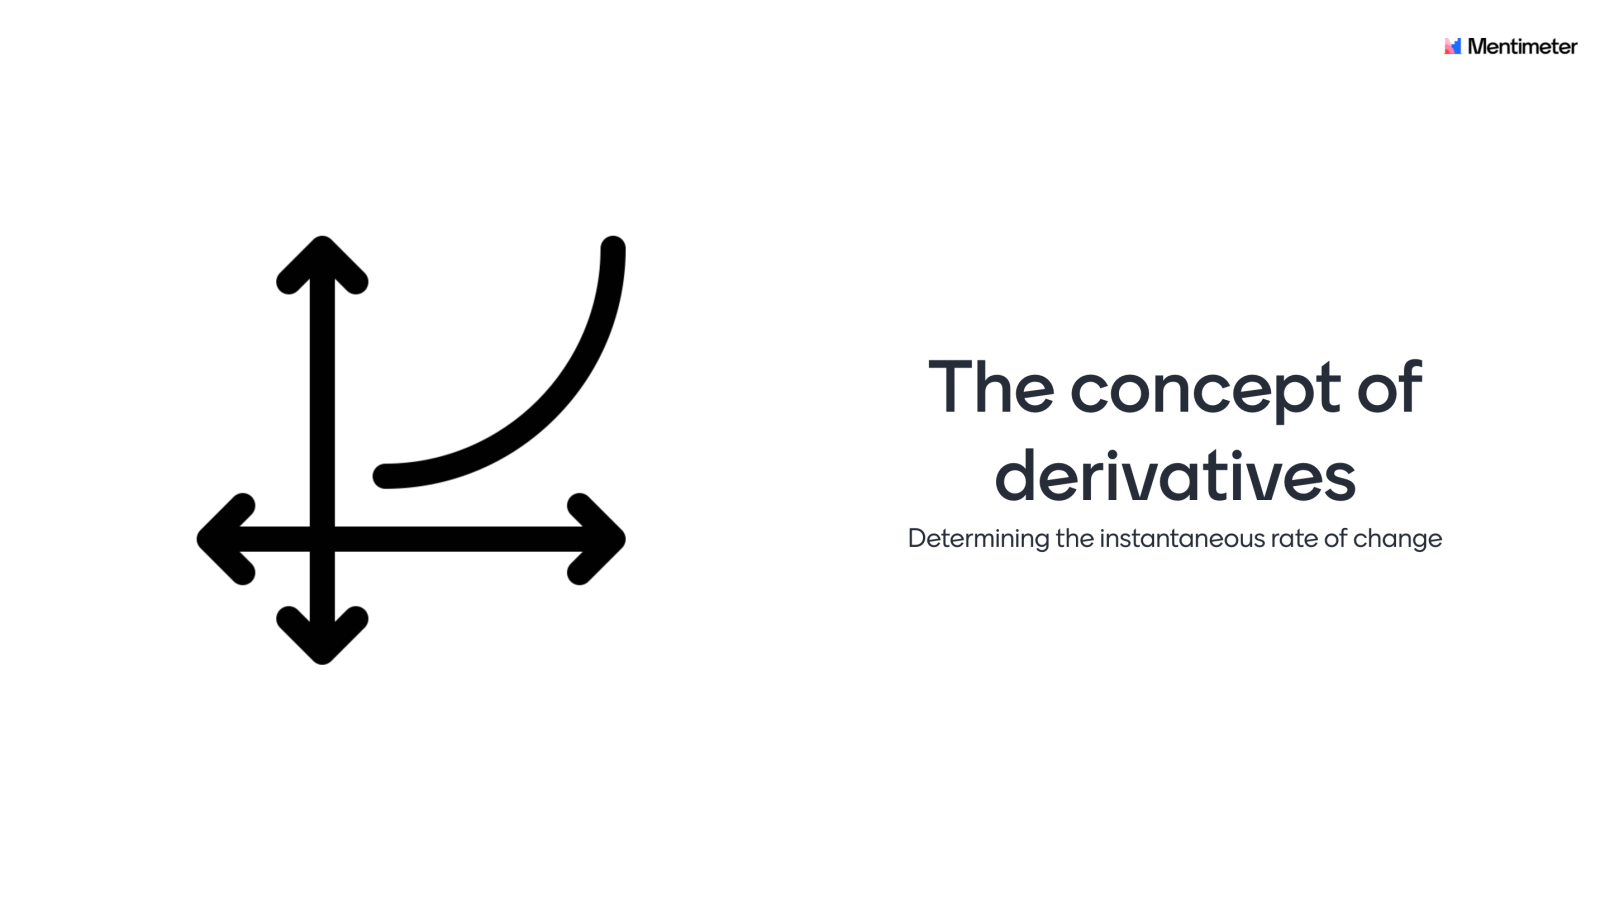 The concept of derivatives